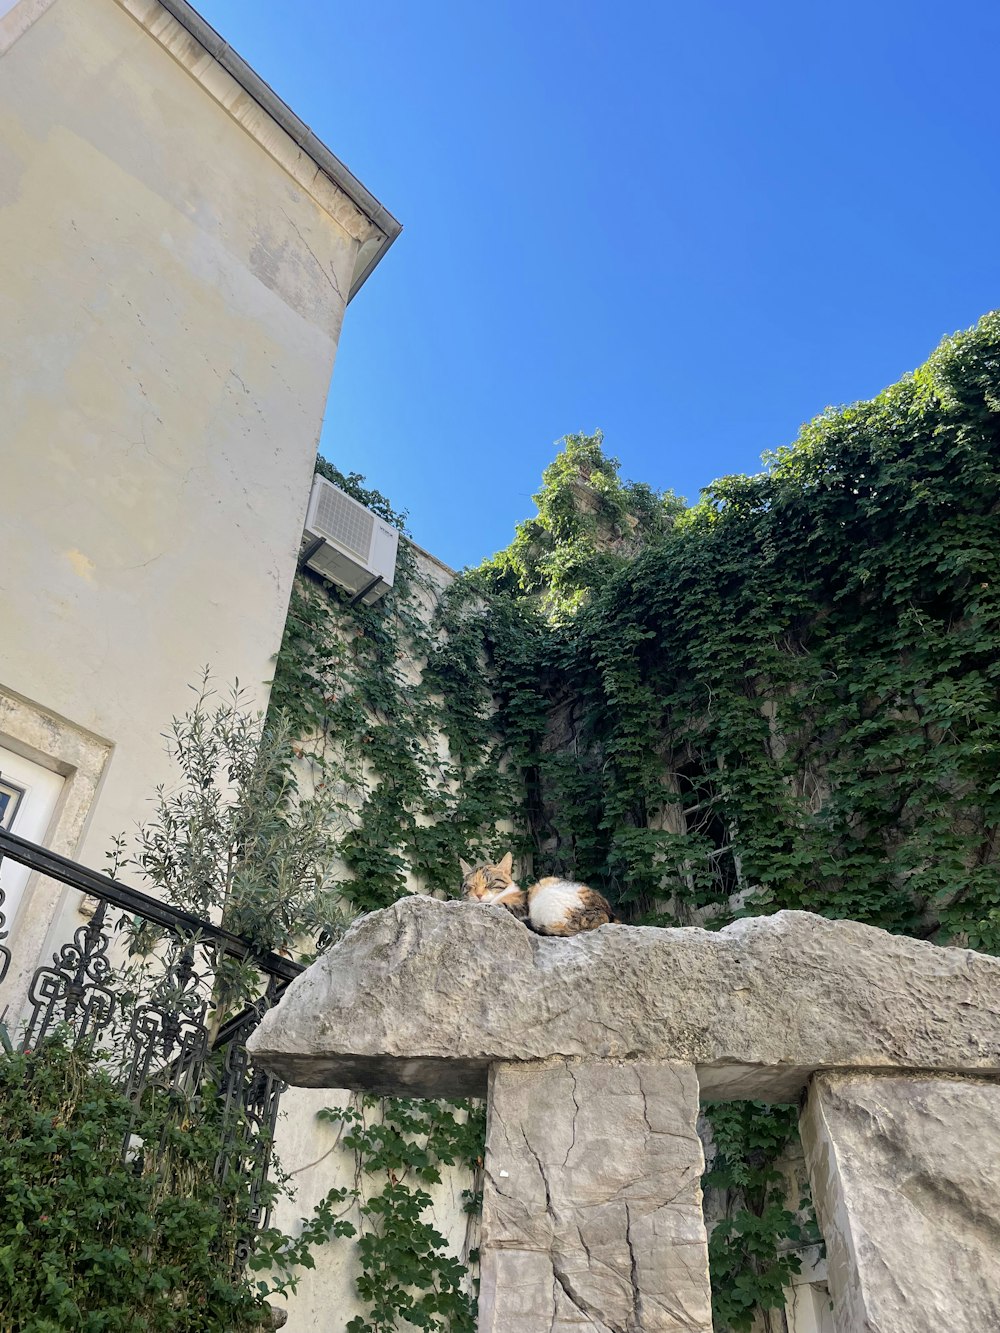 a cat sleeping on a stone bench in front of a building